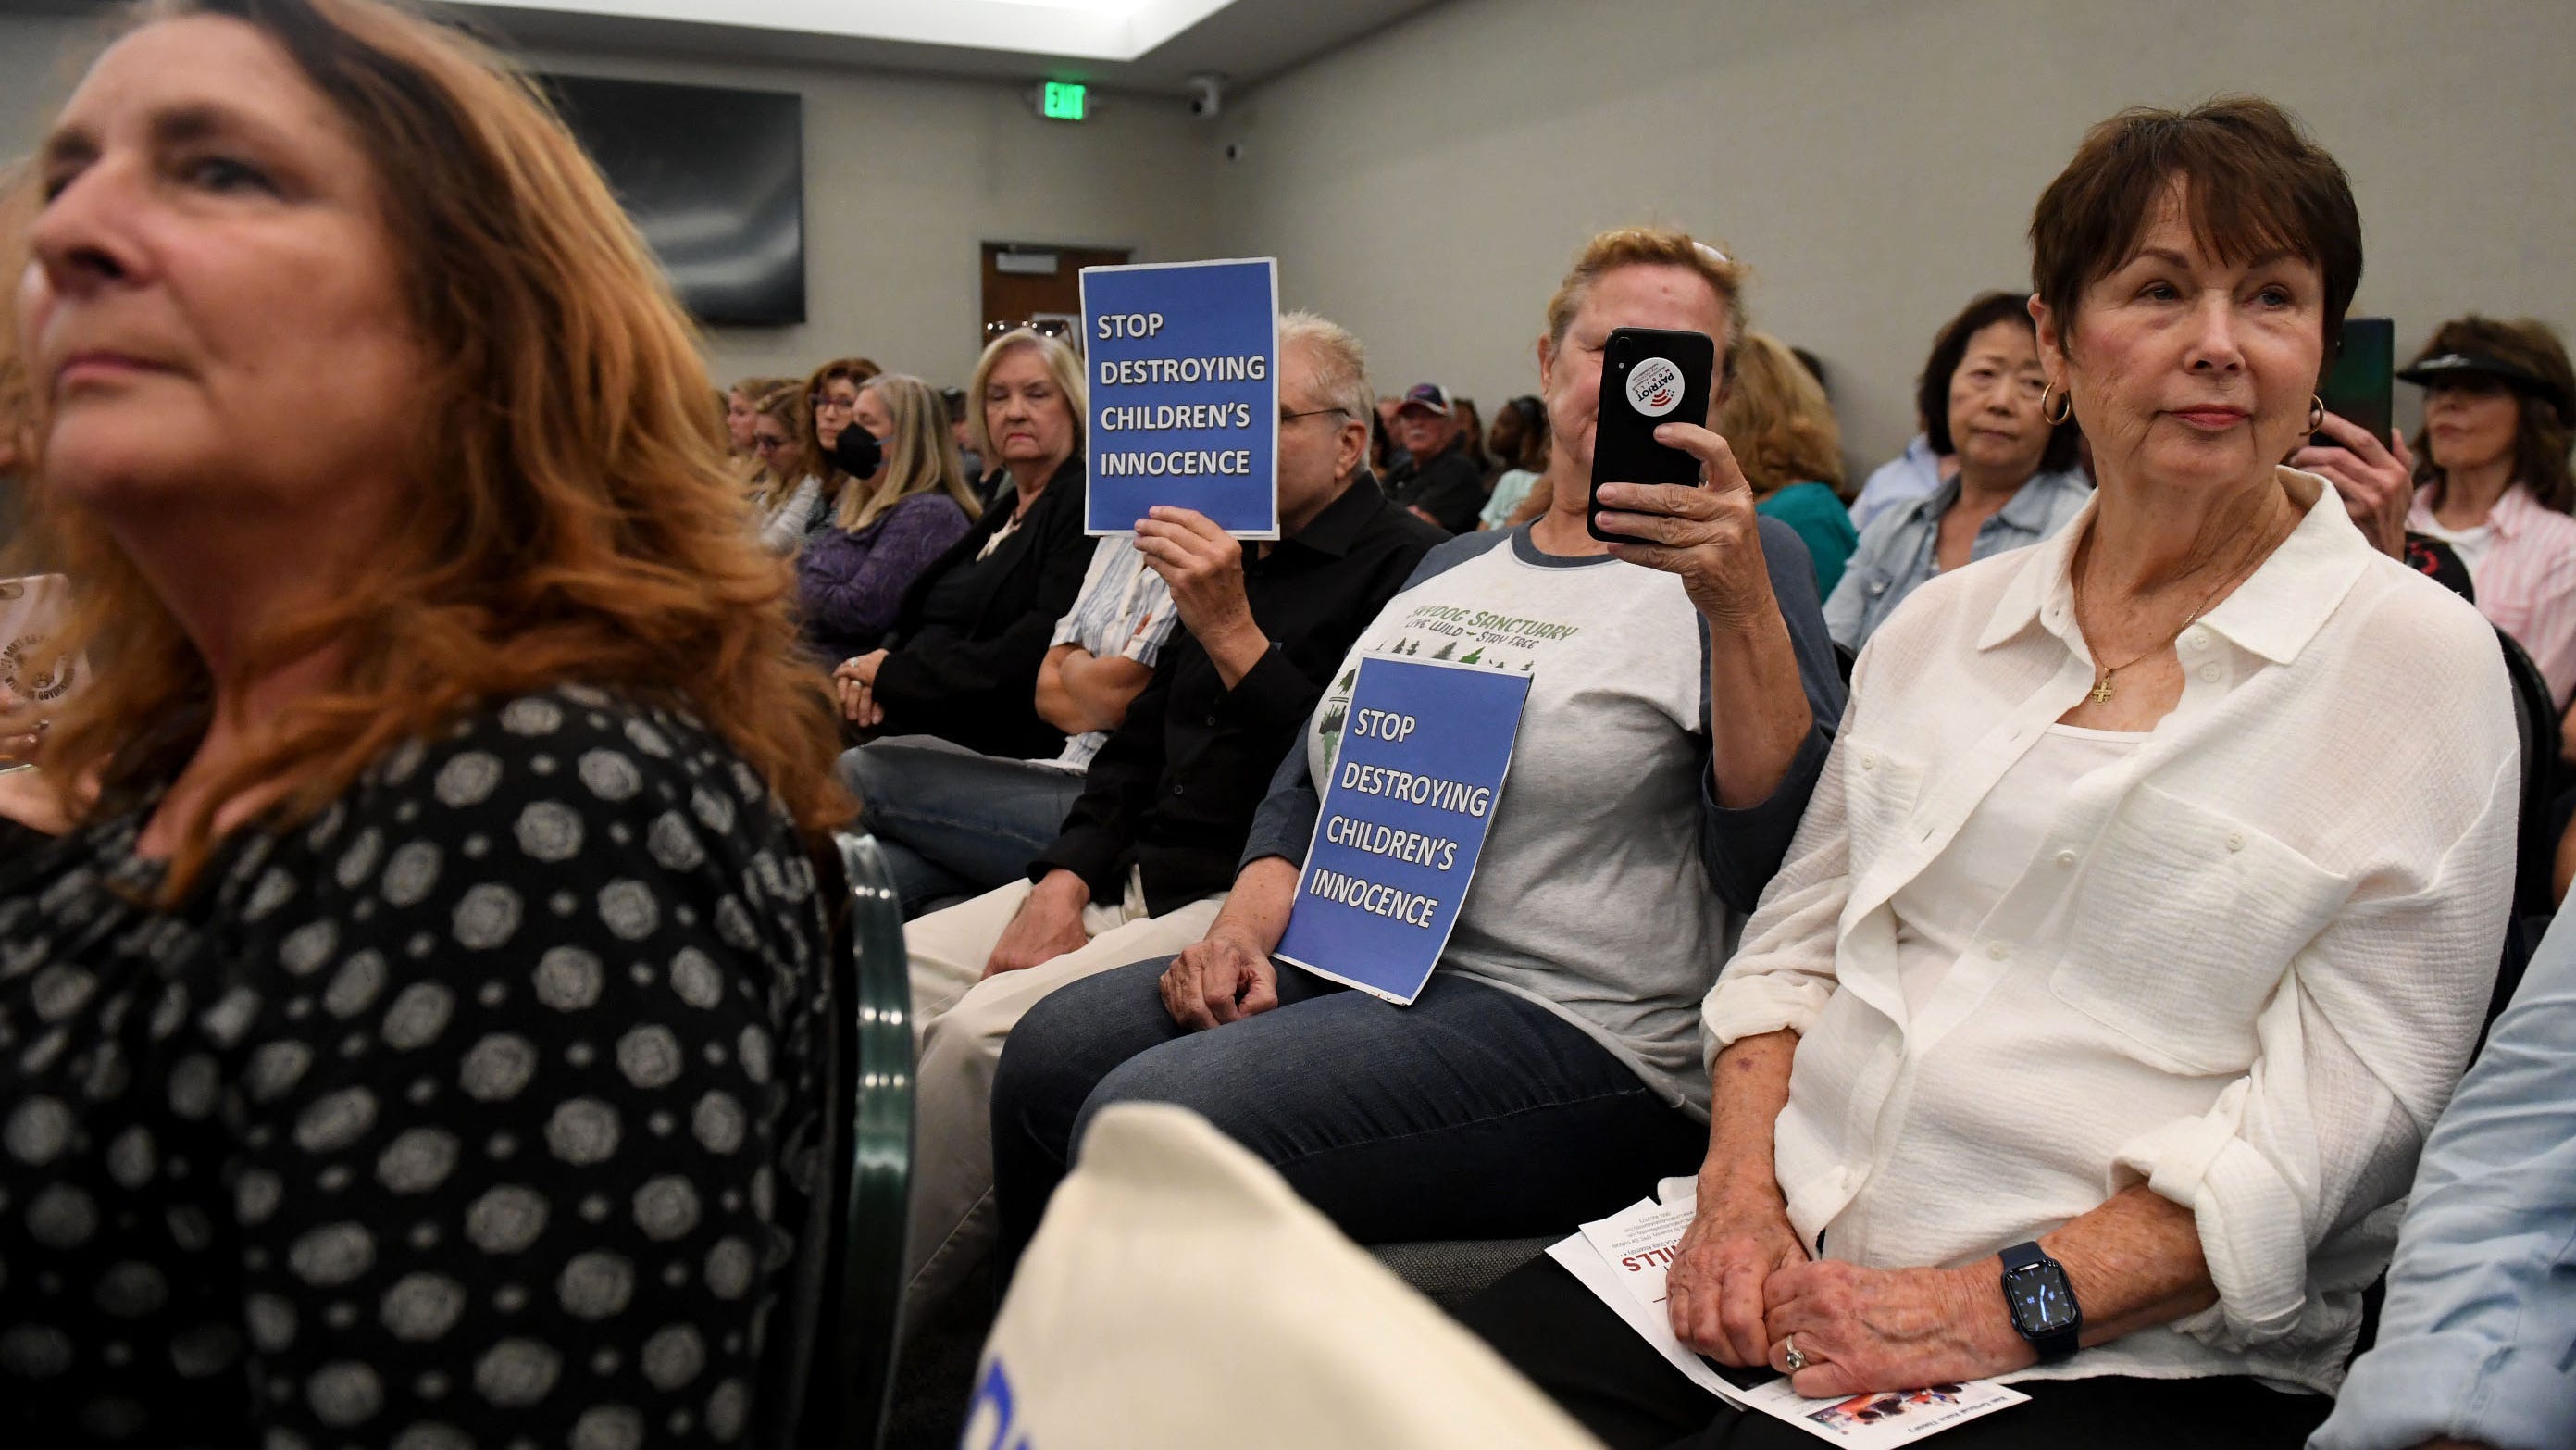 School board dissidents find a home at Godspeak Calvary Chapel in Newbury Park